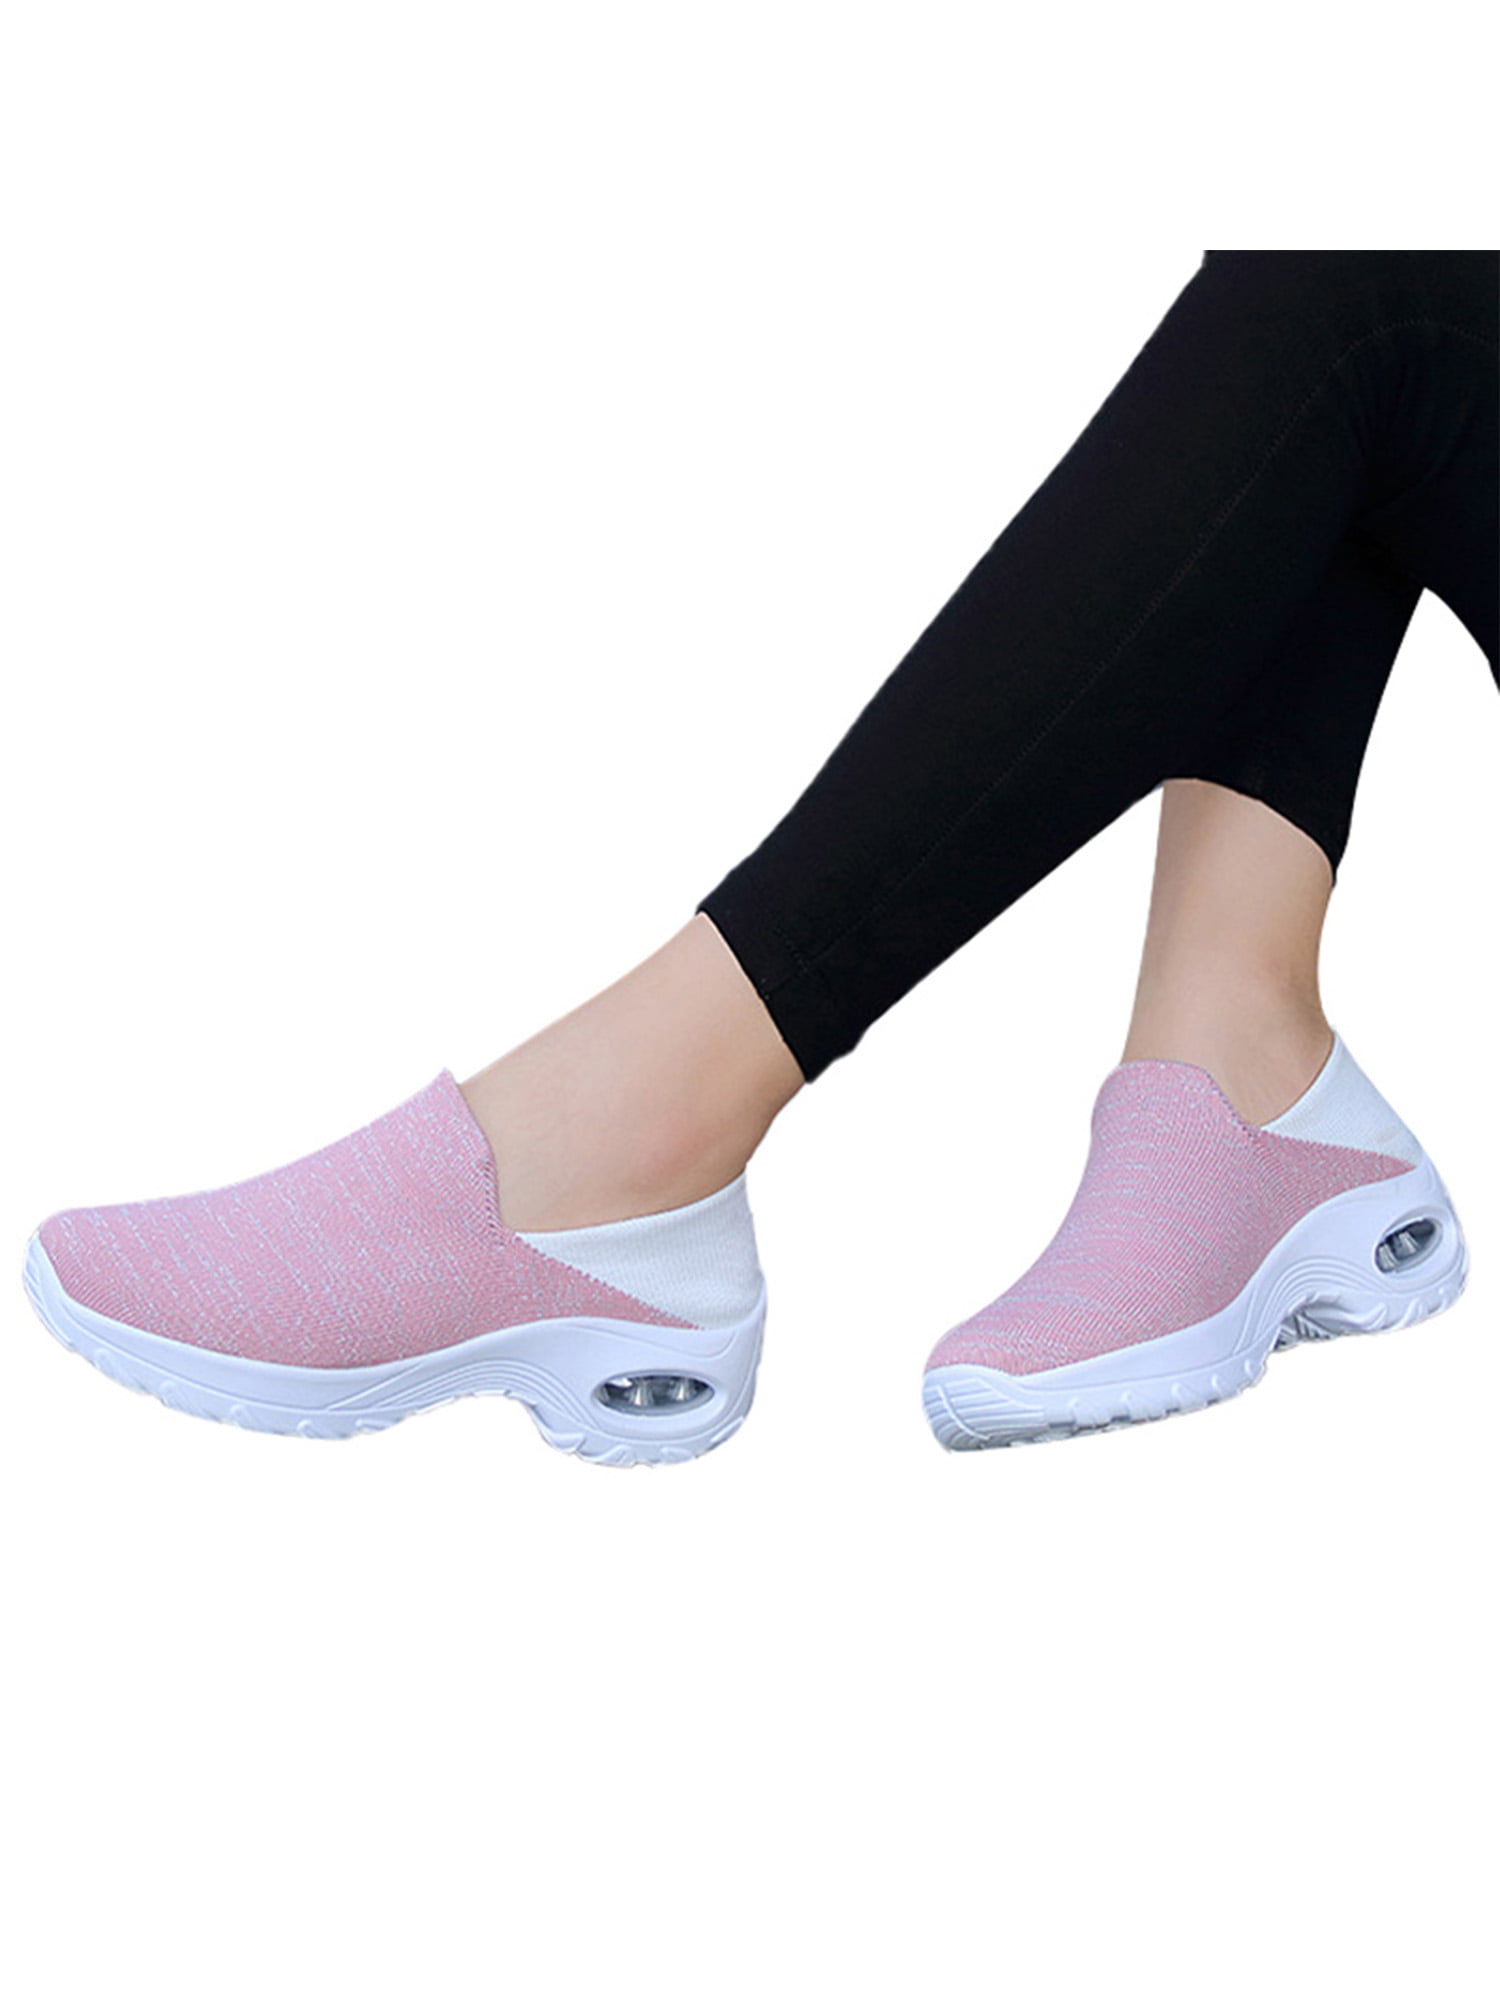 Sock Sneakers for Women の Lite Tech Running Shoes with Wedge Air Cushion Slip On High Top Trainer 2019 Fall-Winter 